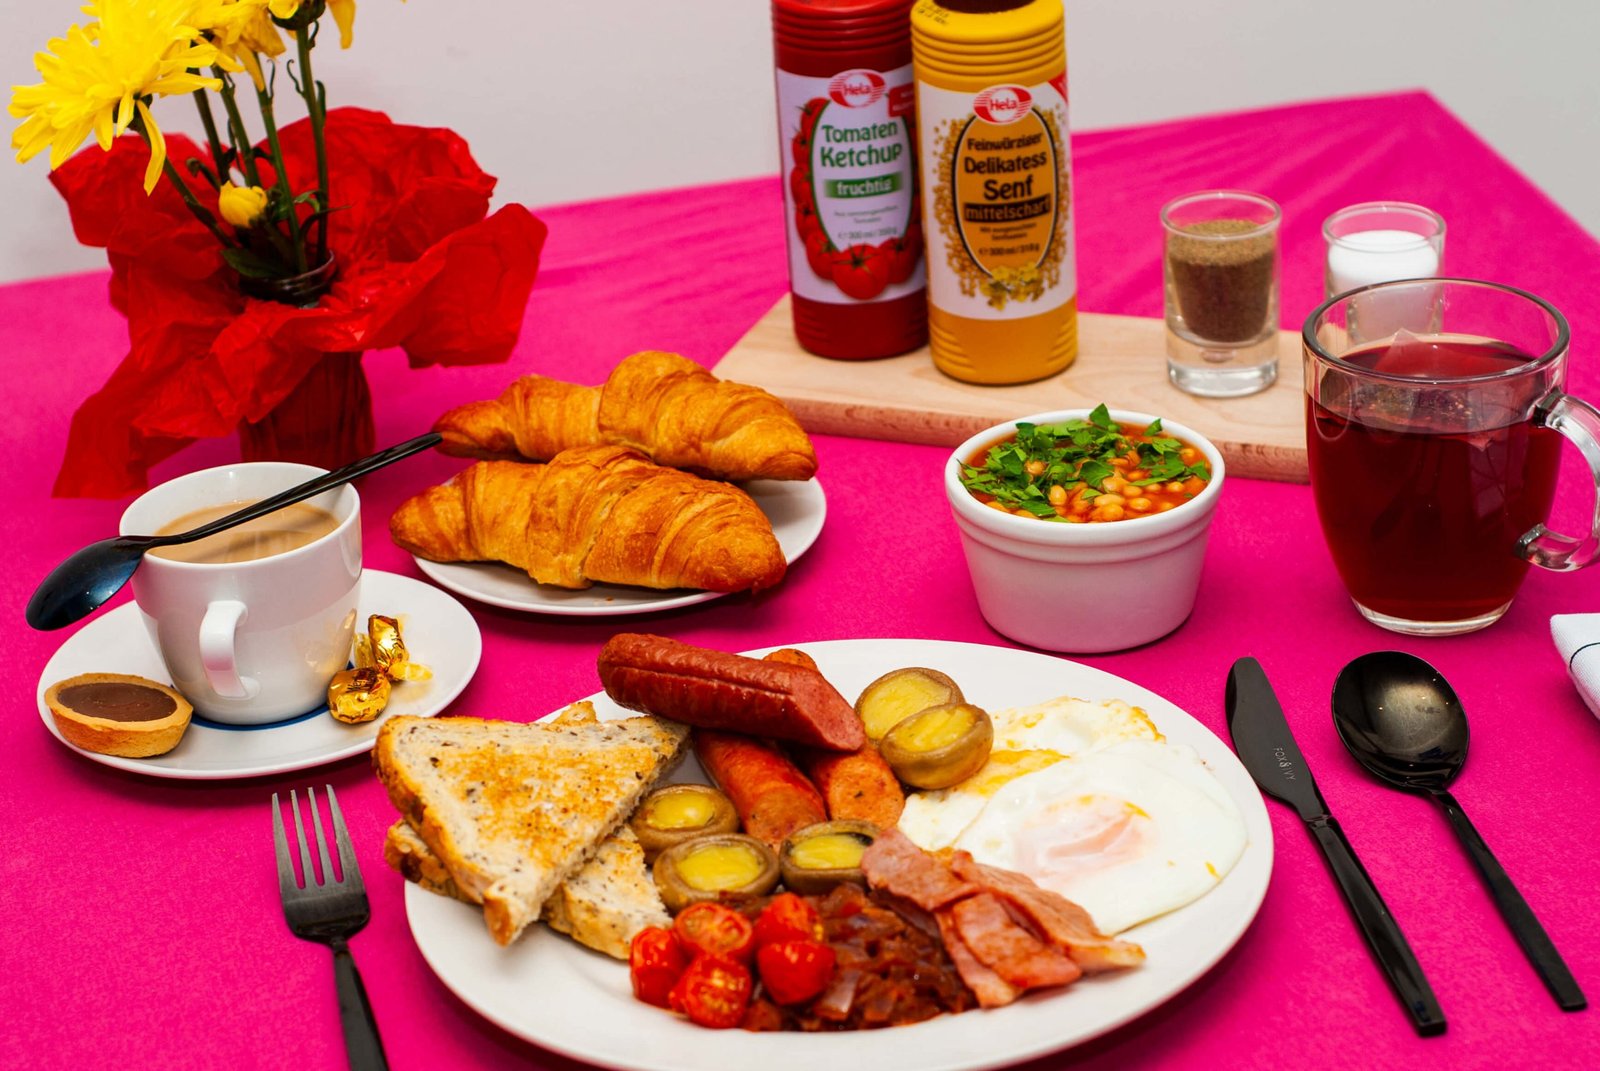 This UK Company Is Paying People To Eat Breakfast